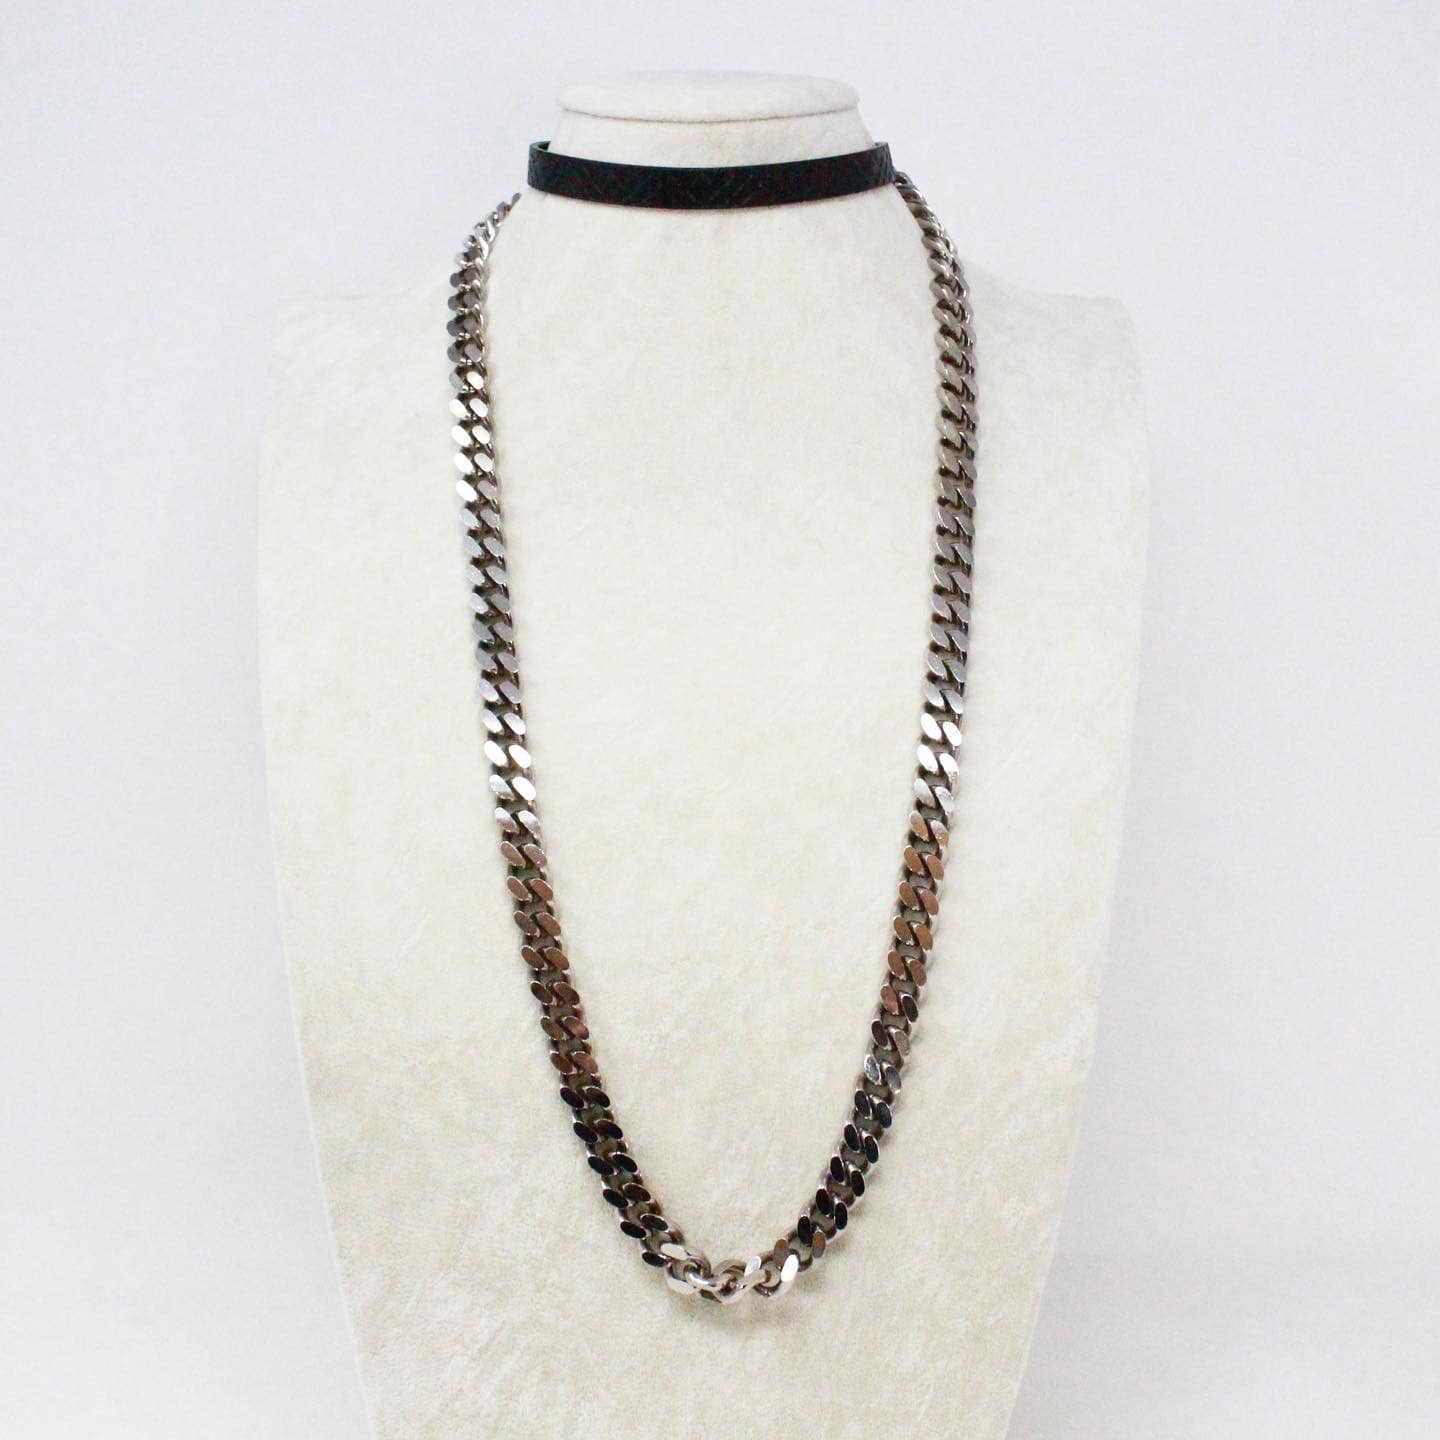 BURBERRY 40151 Black Leather Chain Link Choker Necklace a